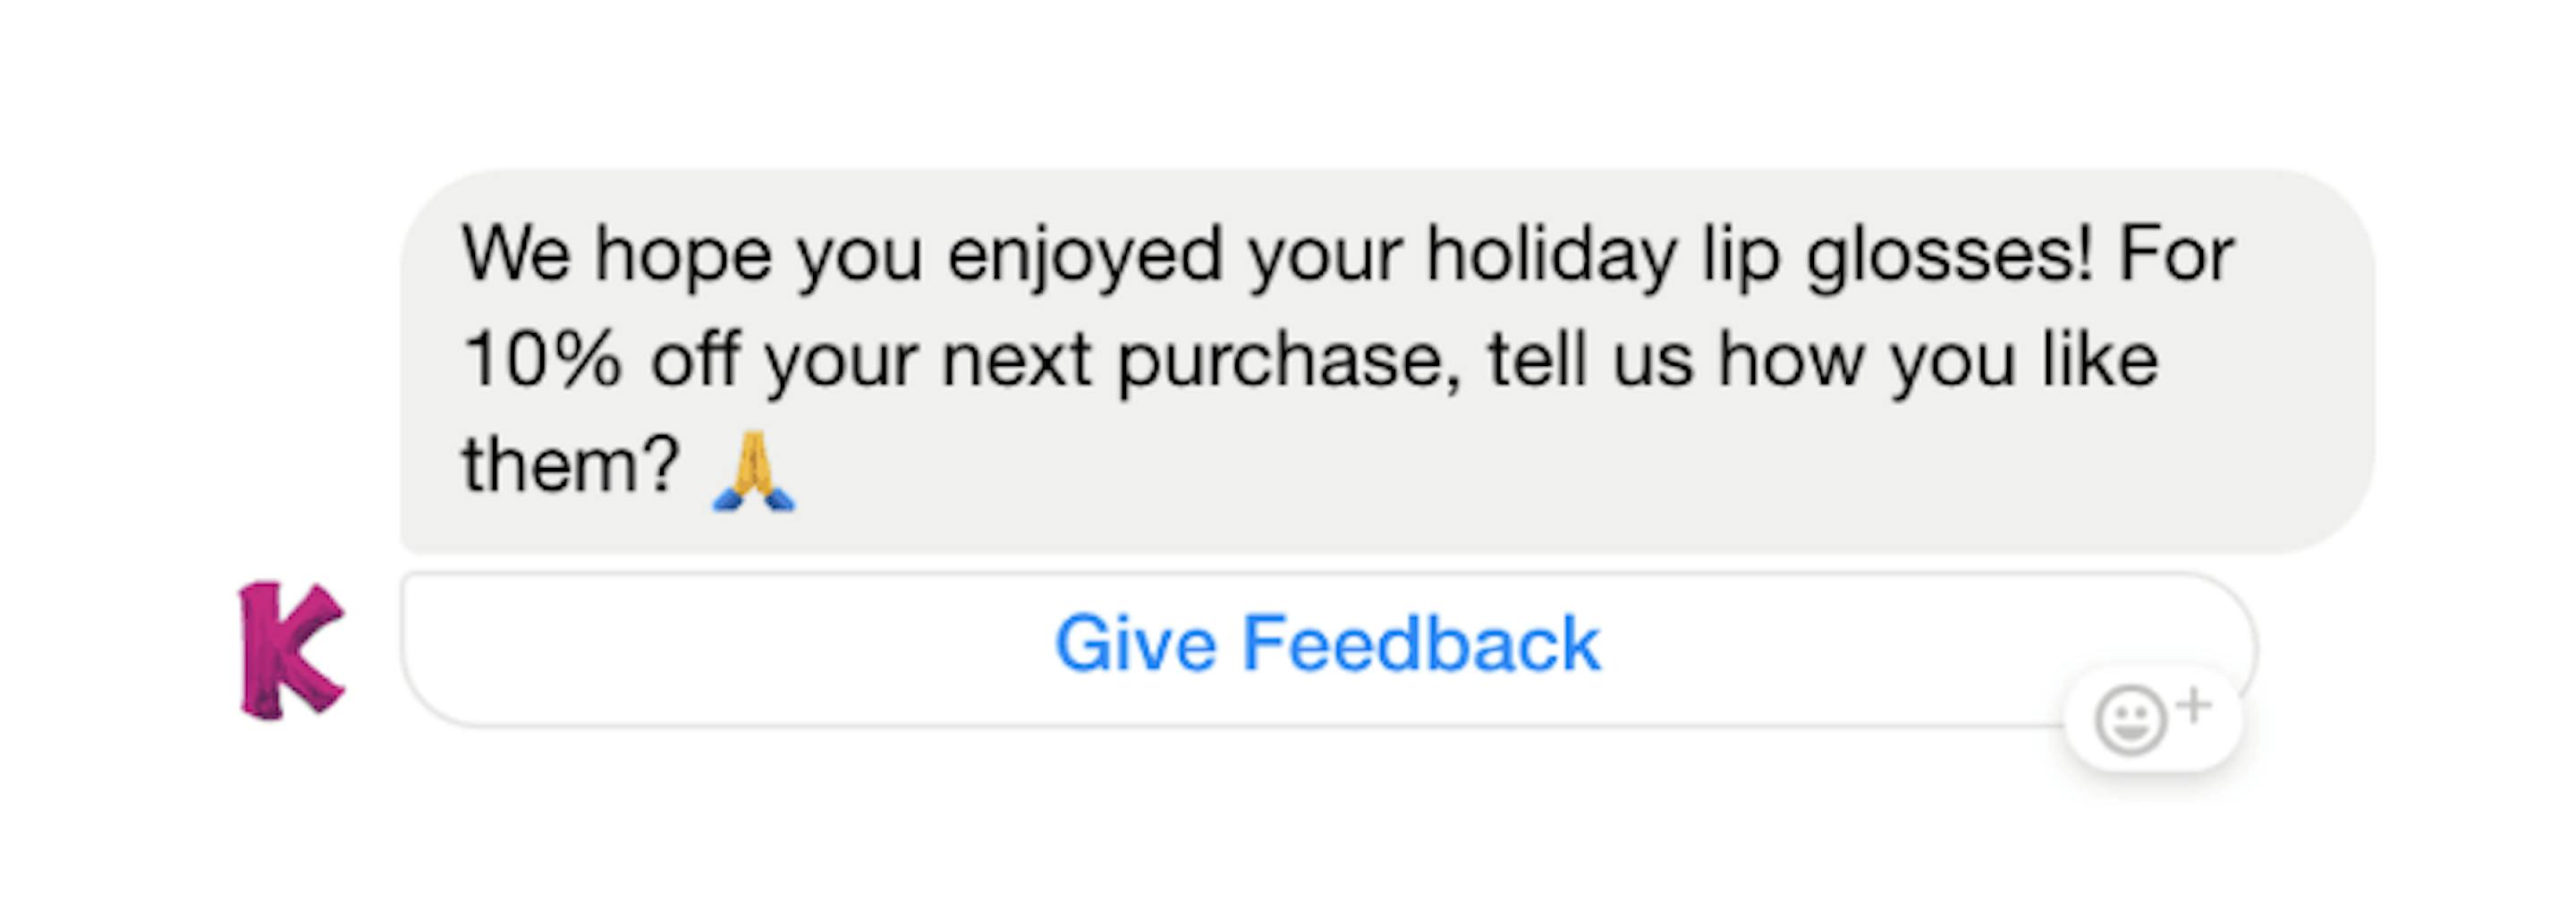 Facebook message showing: "We hope you enjoyed your holiday lip glosses! For 10% off your next purchase, tell us how you like them?"